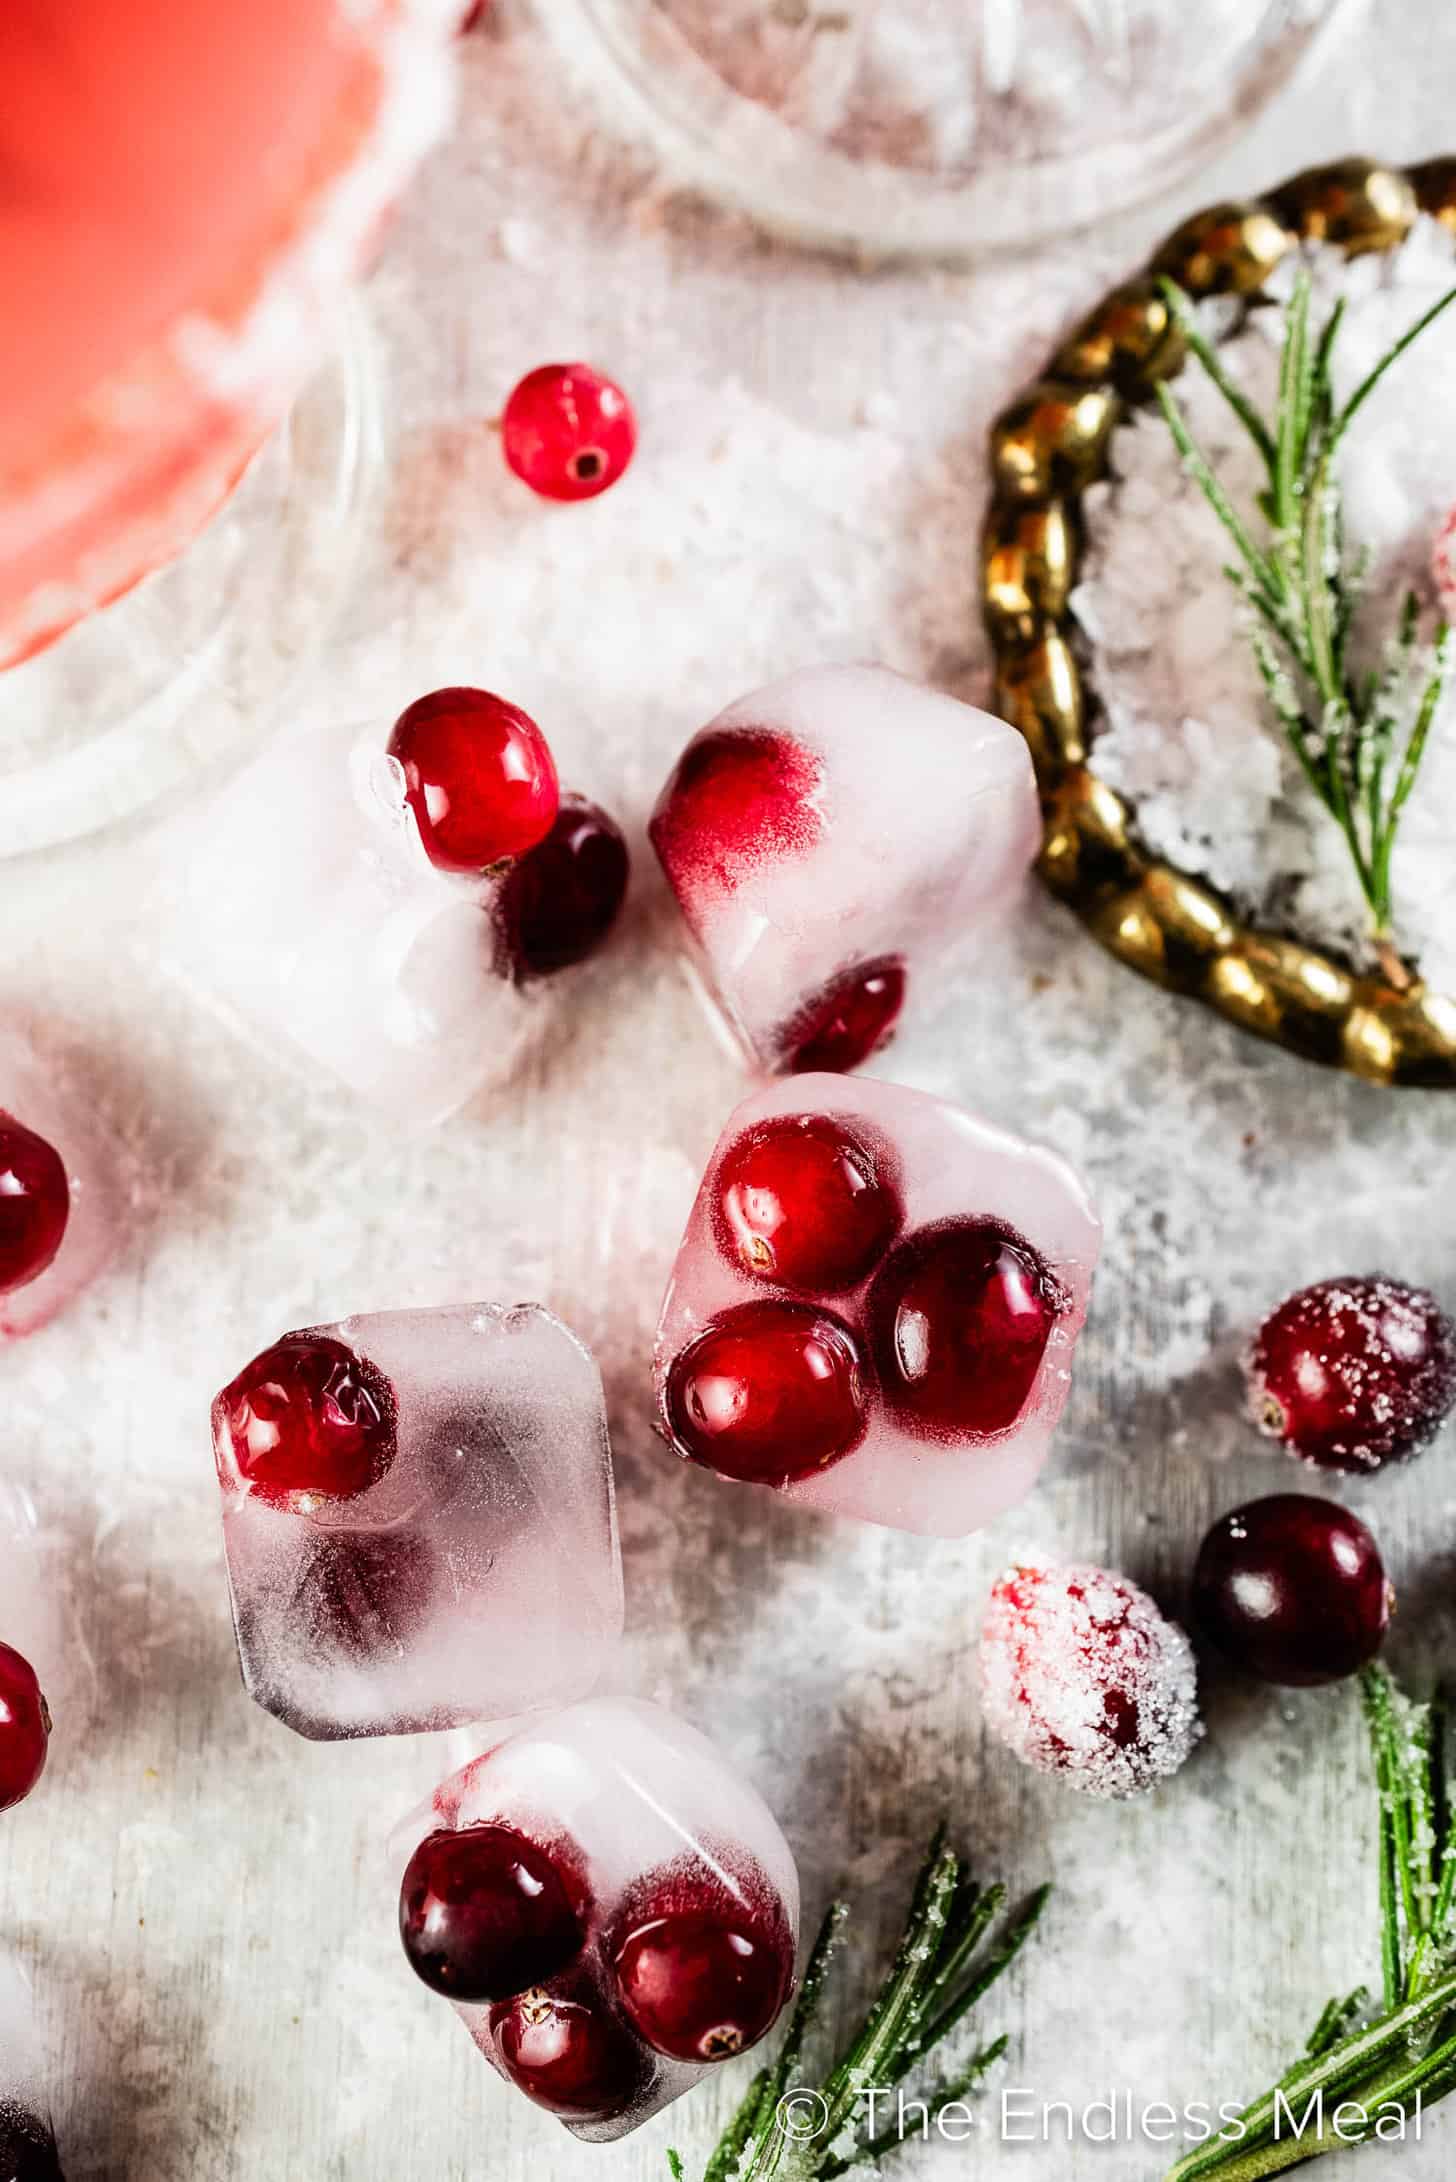 Ice cubes with cranberries